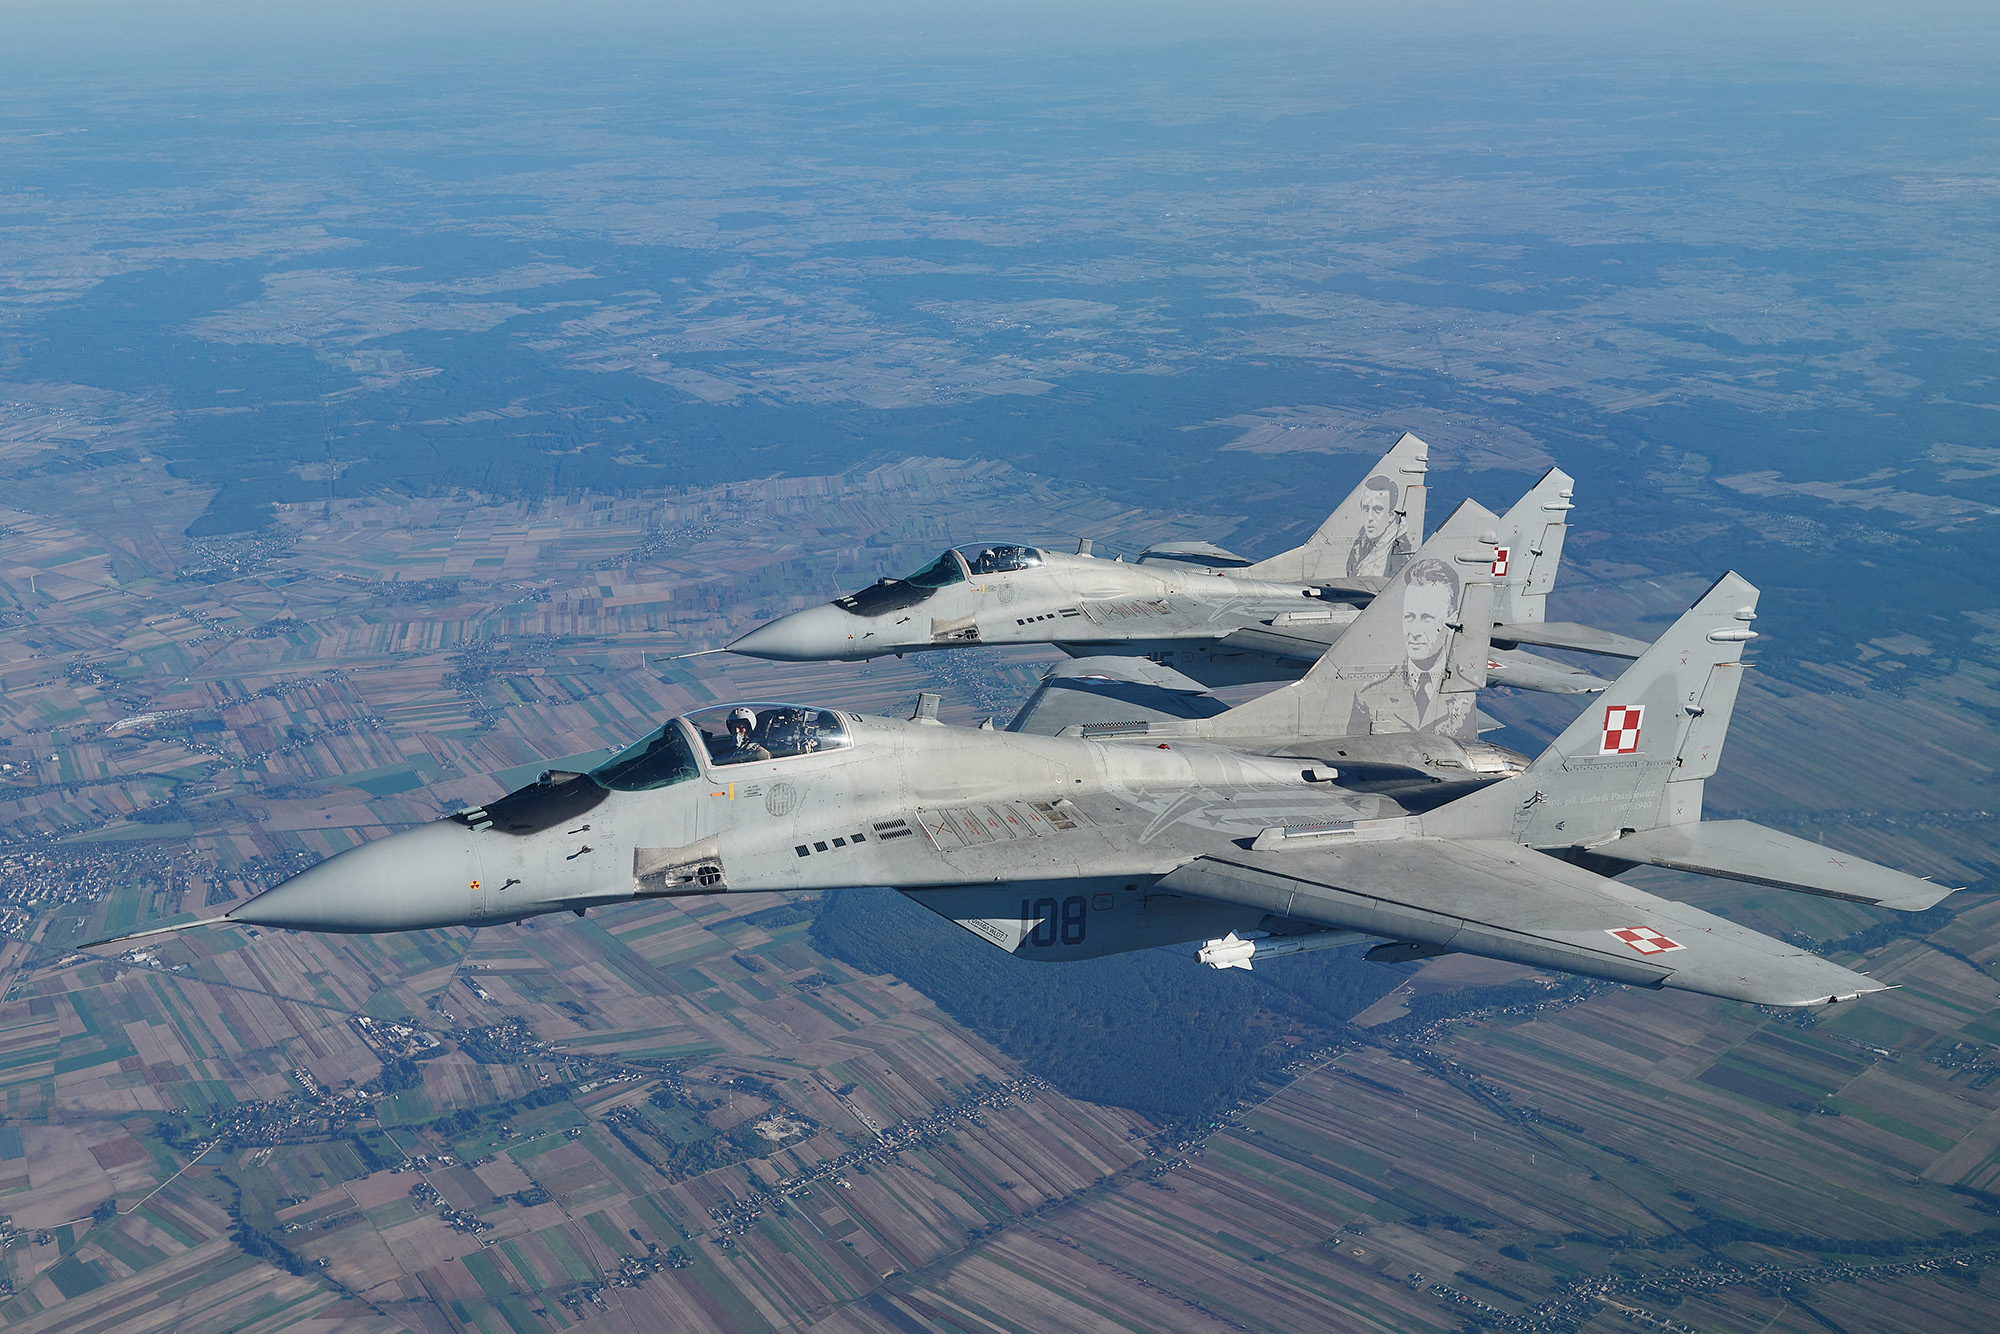 Two Polish MiG-29 fighter jets take part in the NATO Air Shielding exercise near the air base in Lask, central Poland on October 12.